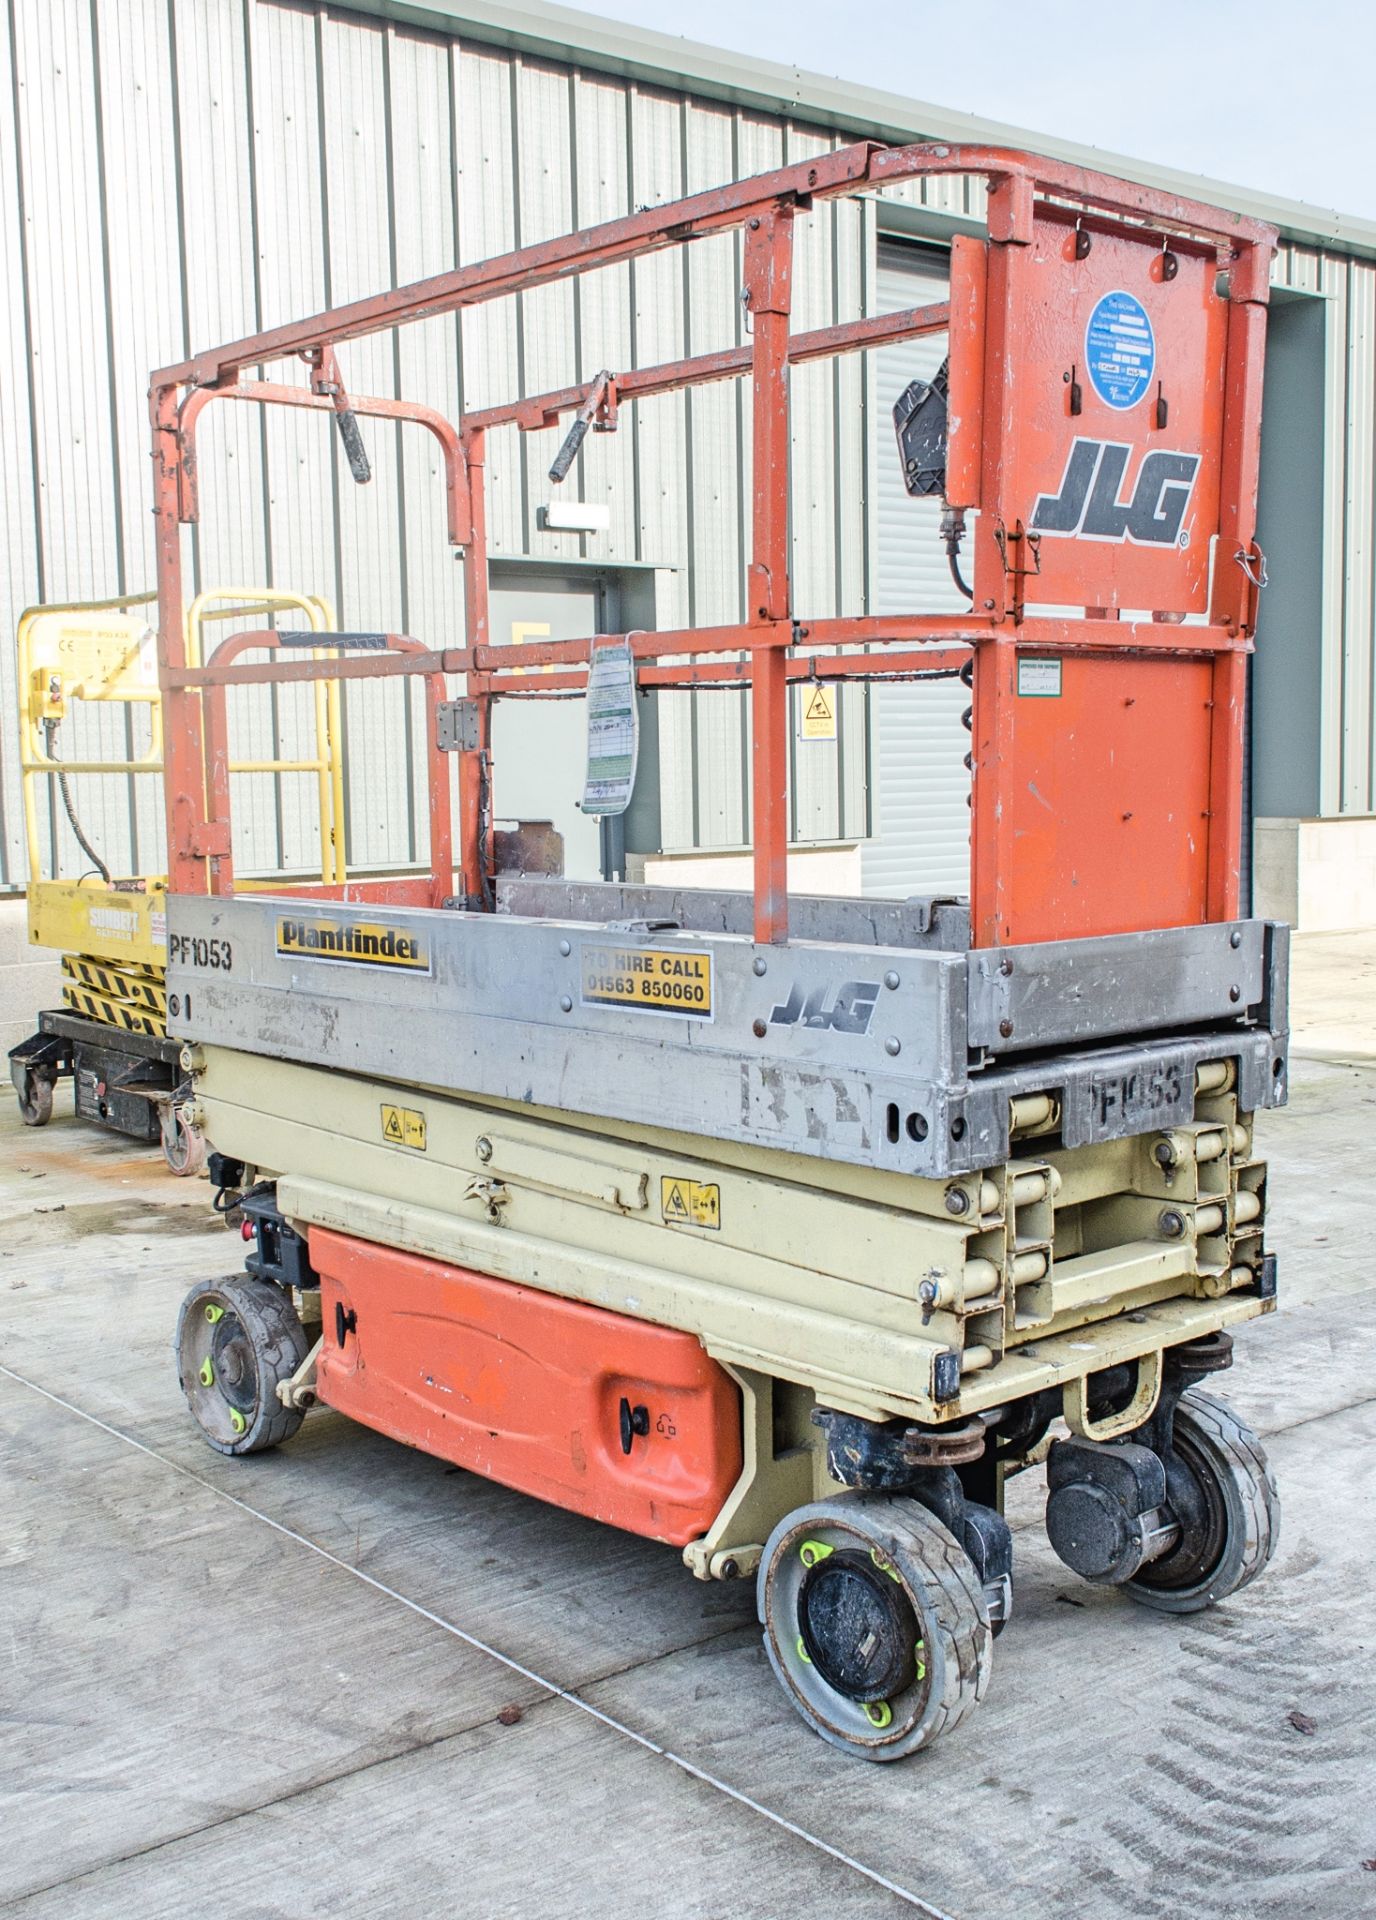 JLG 1930ES battery electric scissor lift Year: 2010 S/N: 1200023651 Recorded hours: 49 PF1053 - Image 3 of 9